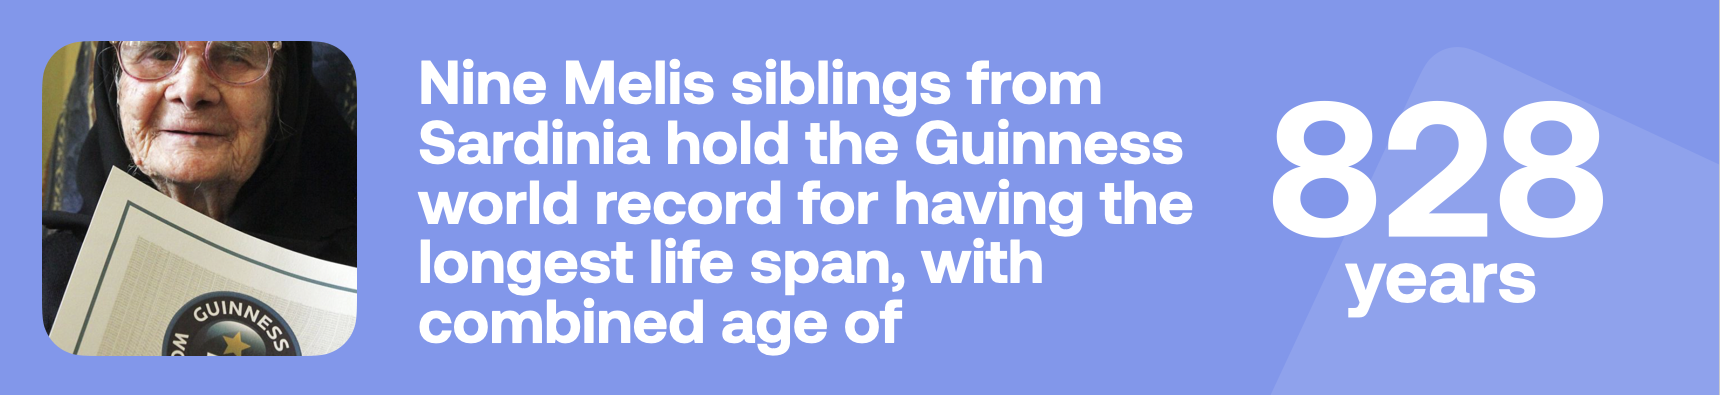 Nine Melis siblings from Sardinia hold the Guinness world record for having the longest life span, with combined age of 828 years